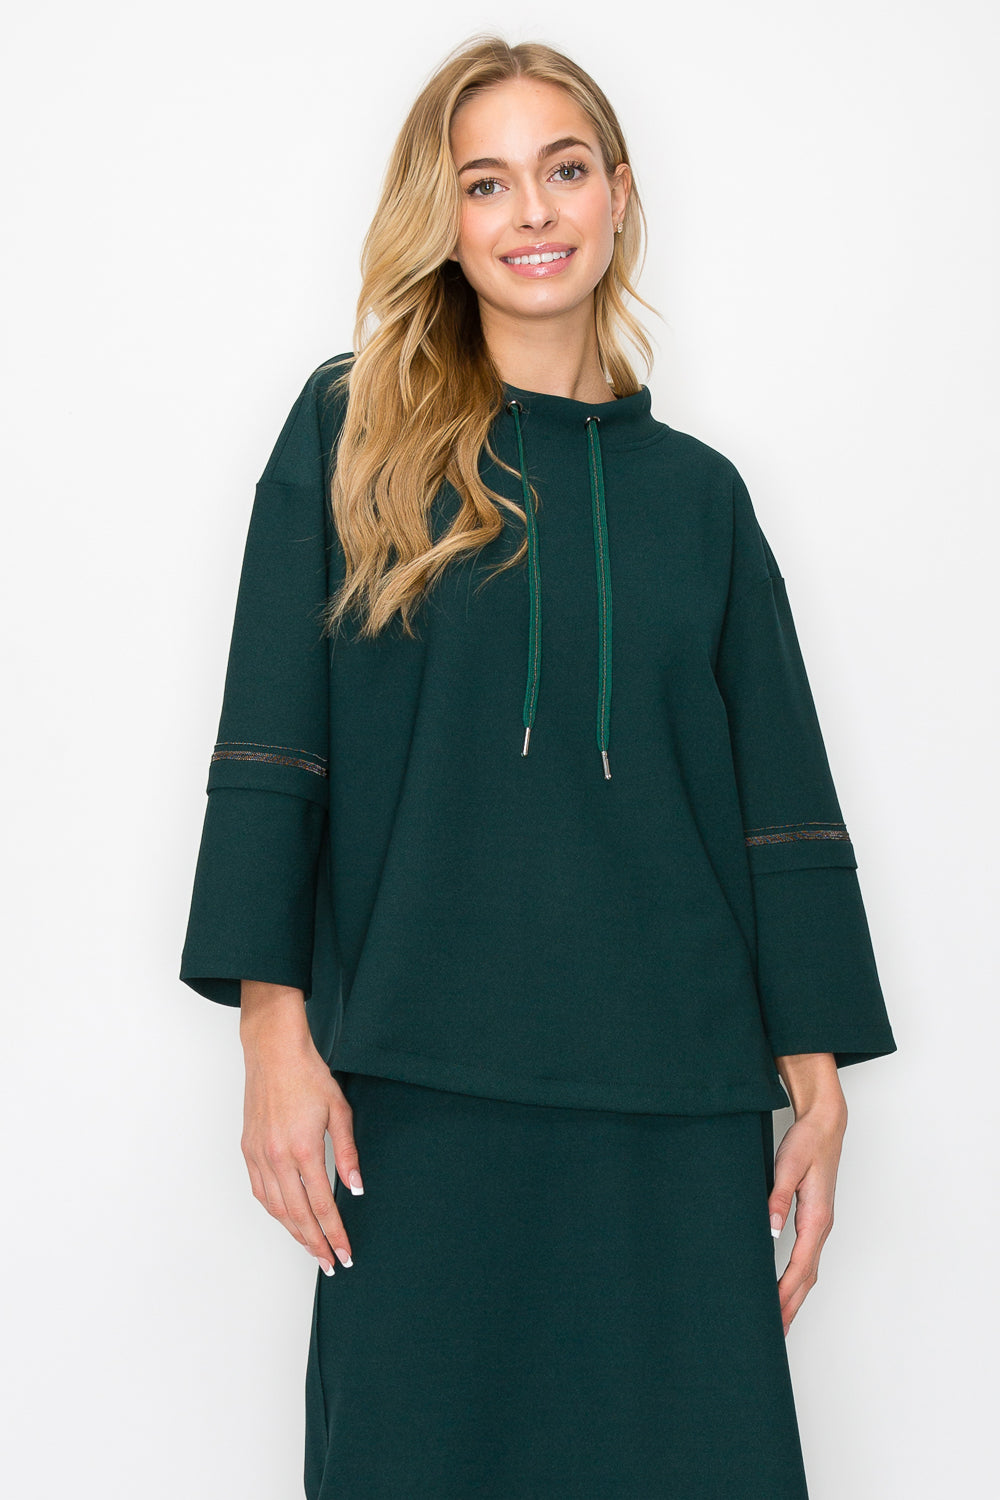 Kayla Crepe Knit Top with Beading Trim